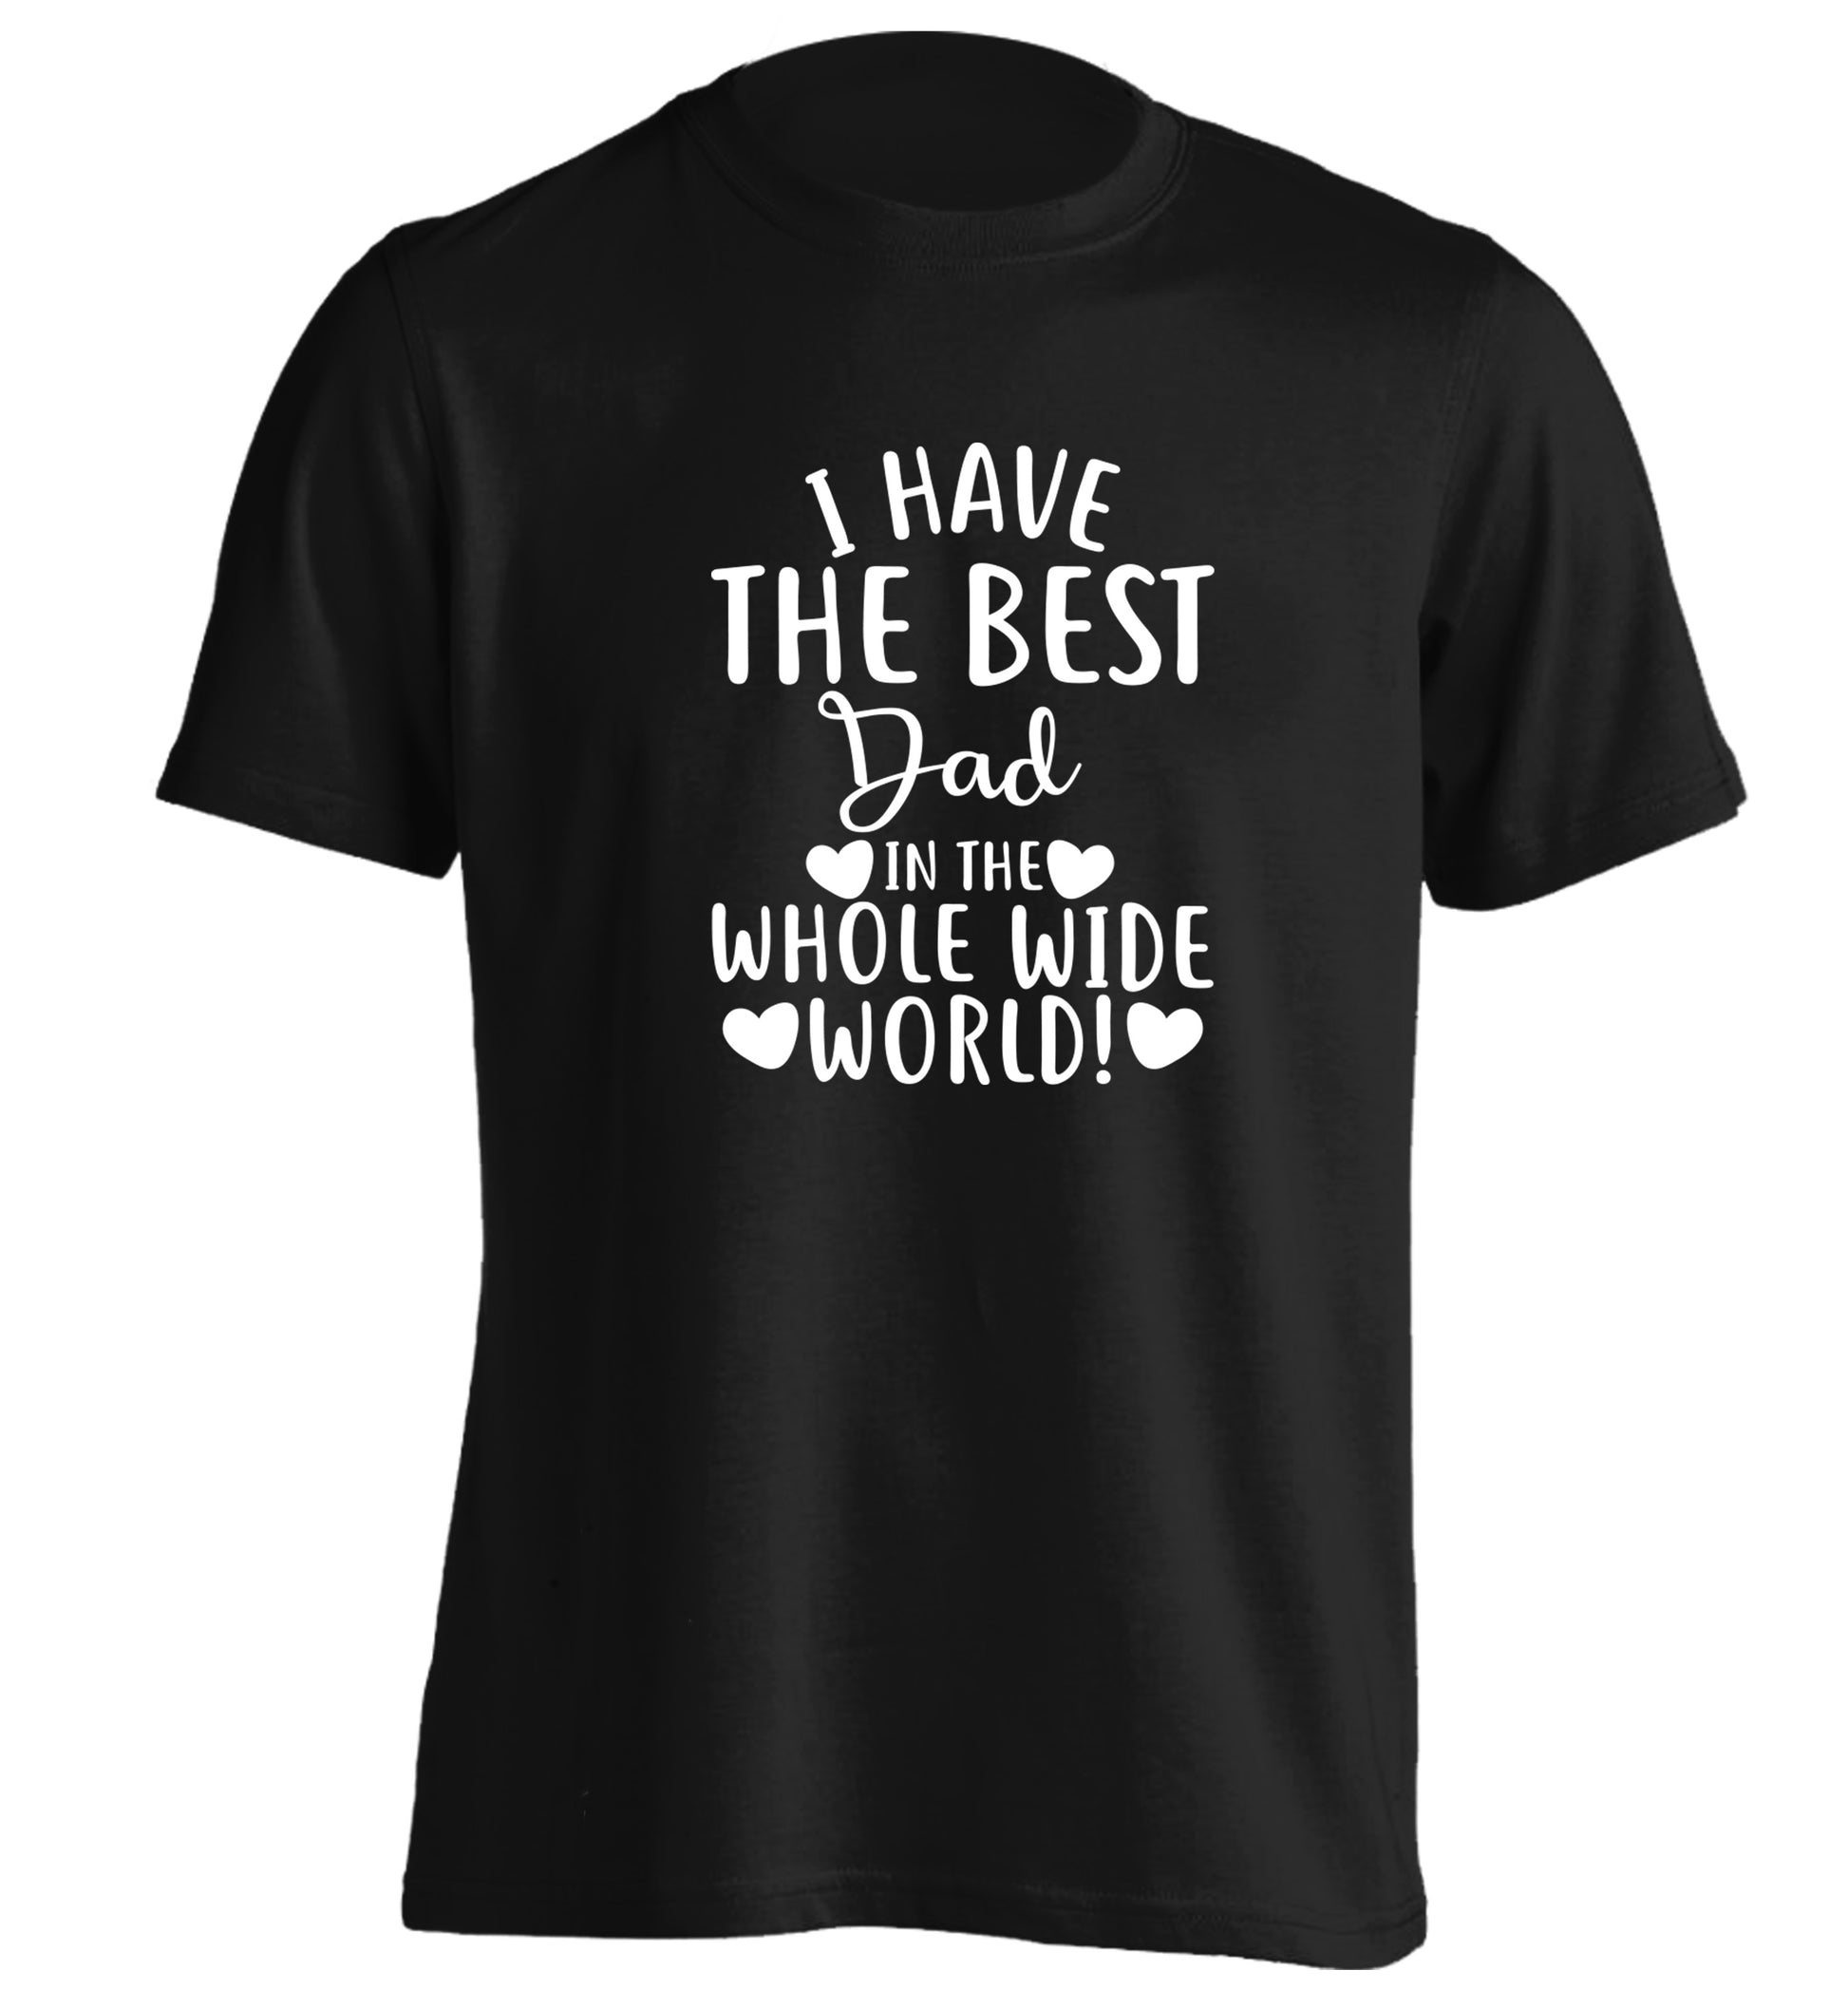 I have the best dad in the whole wide world! adults unisex black Tshirt 2XL